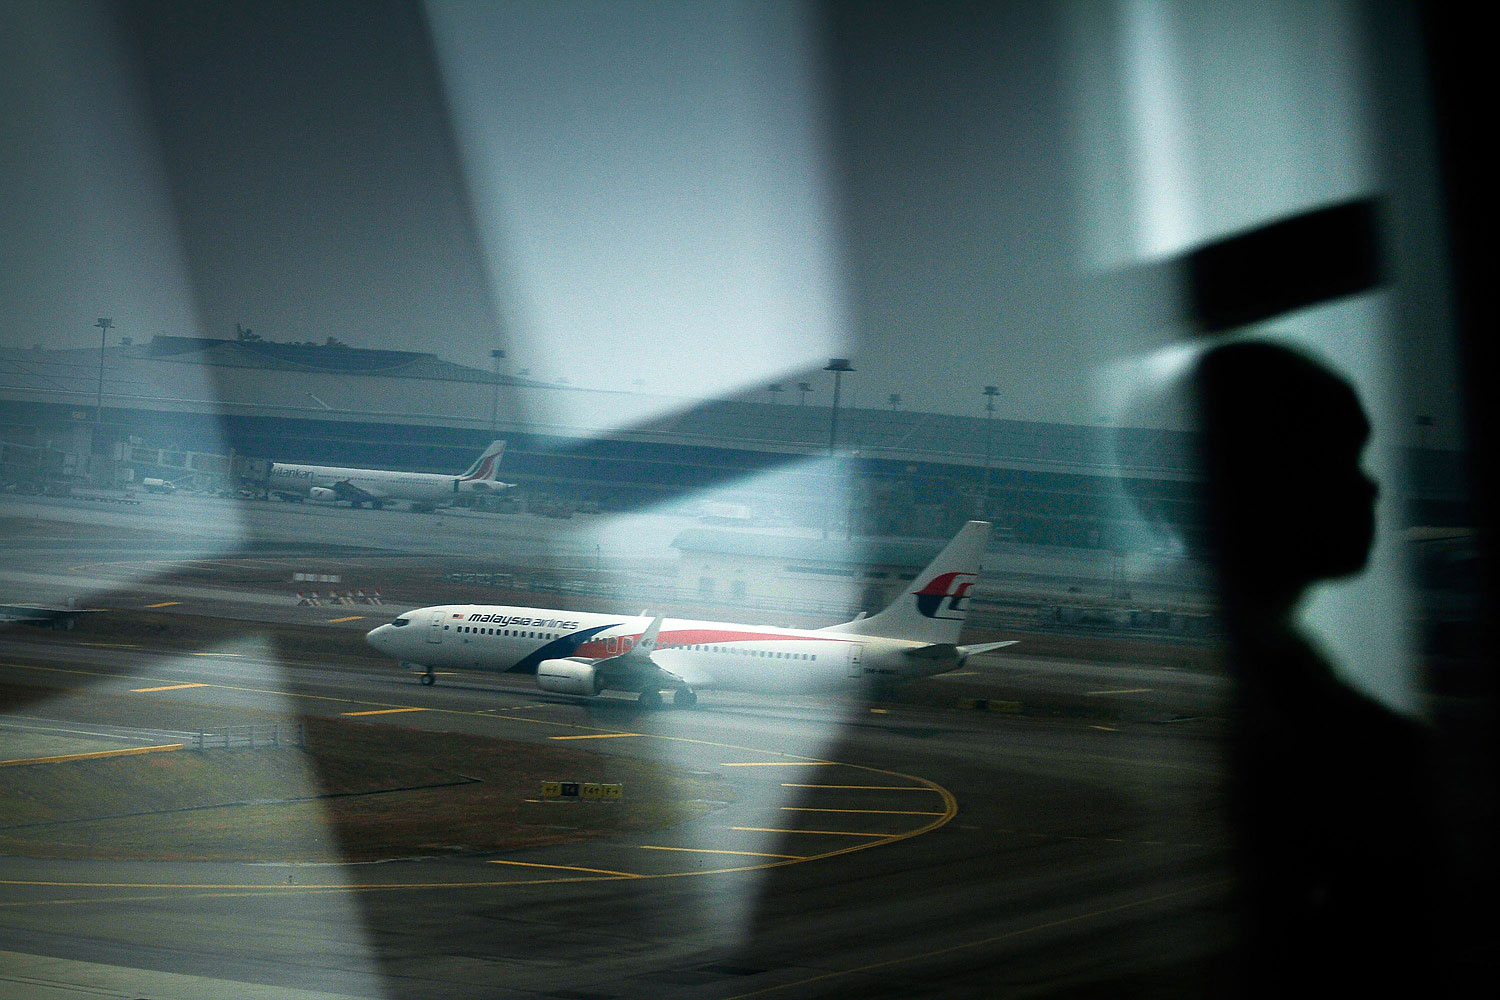 A Malaysian Airlines plane is seen on the tarmac at Kuala Lumpur International Airport on March 12, 2014 in Kuala Lumpur. (Rahman Roslan—Getty Images)